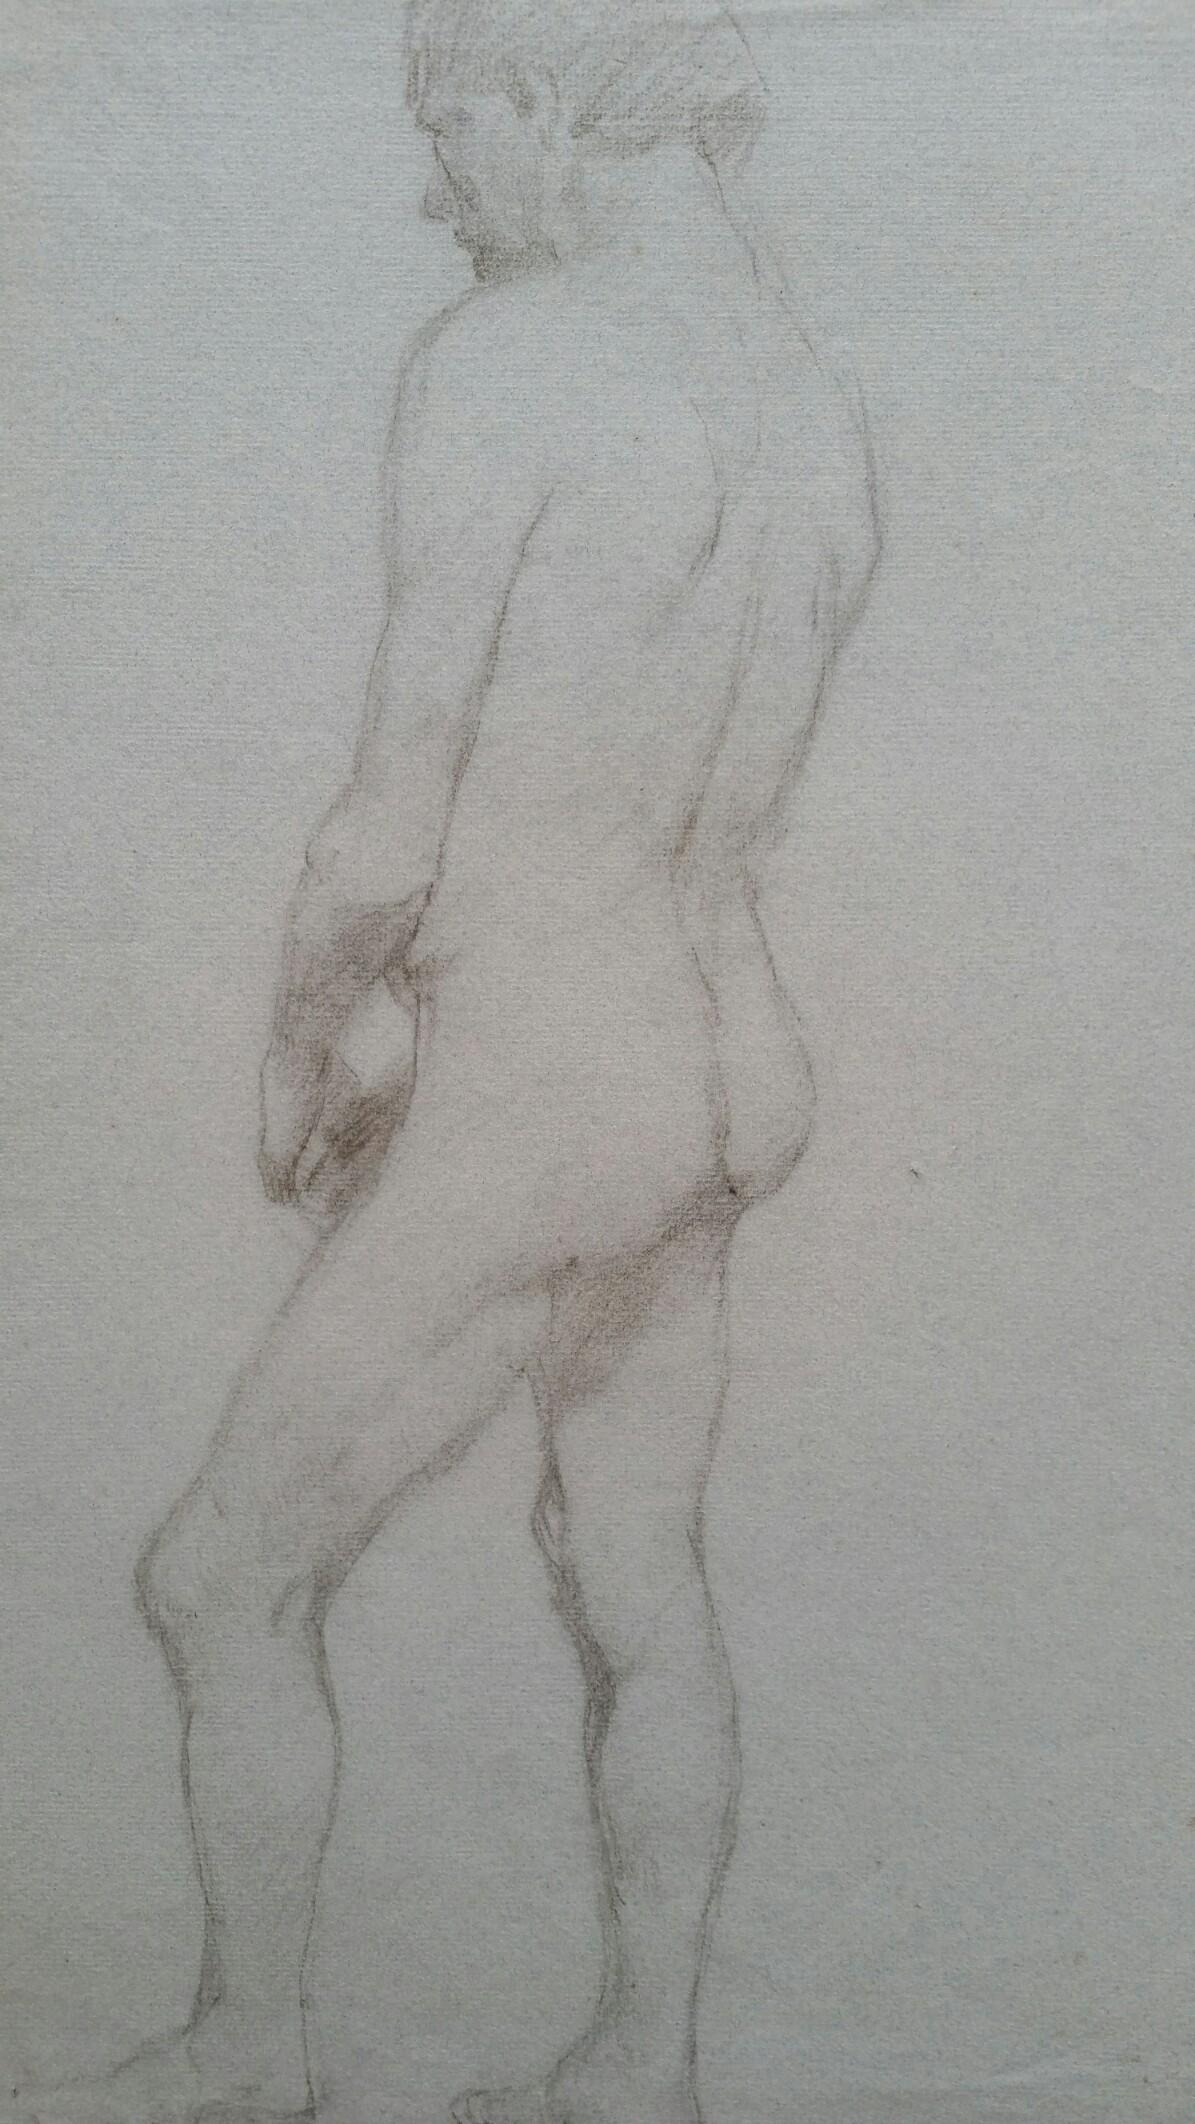 English Graphite Portrait Sketch of Male Nude, Back View